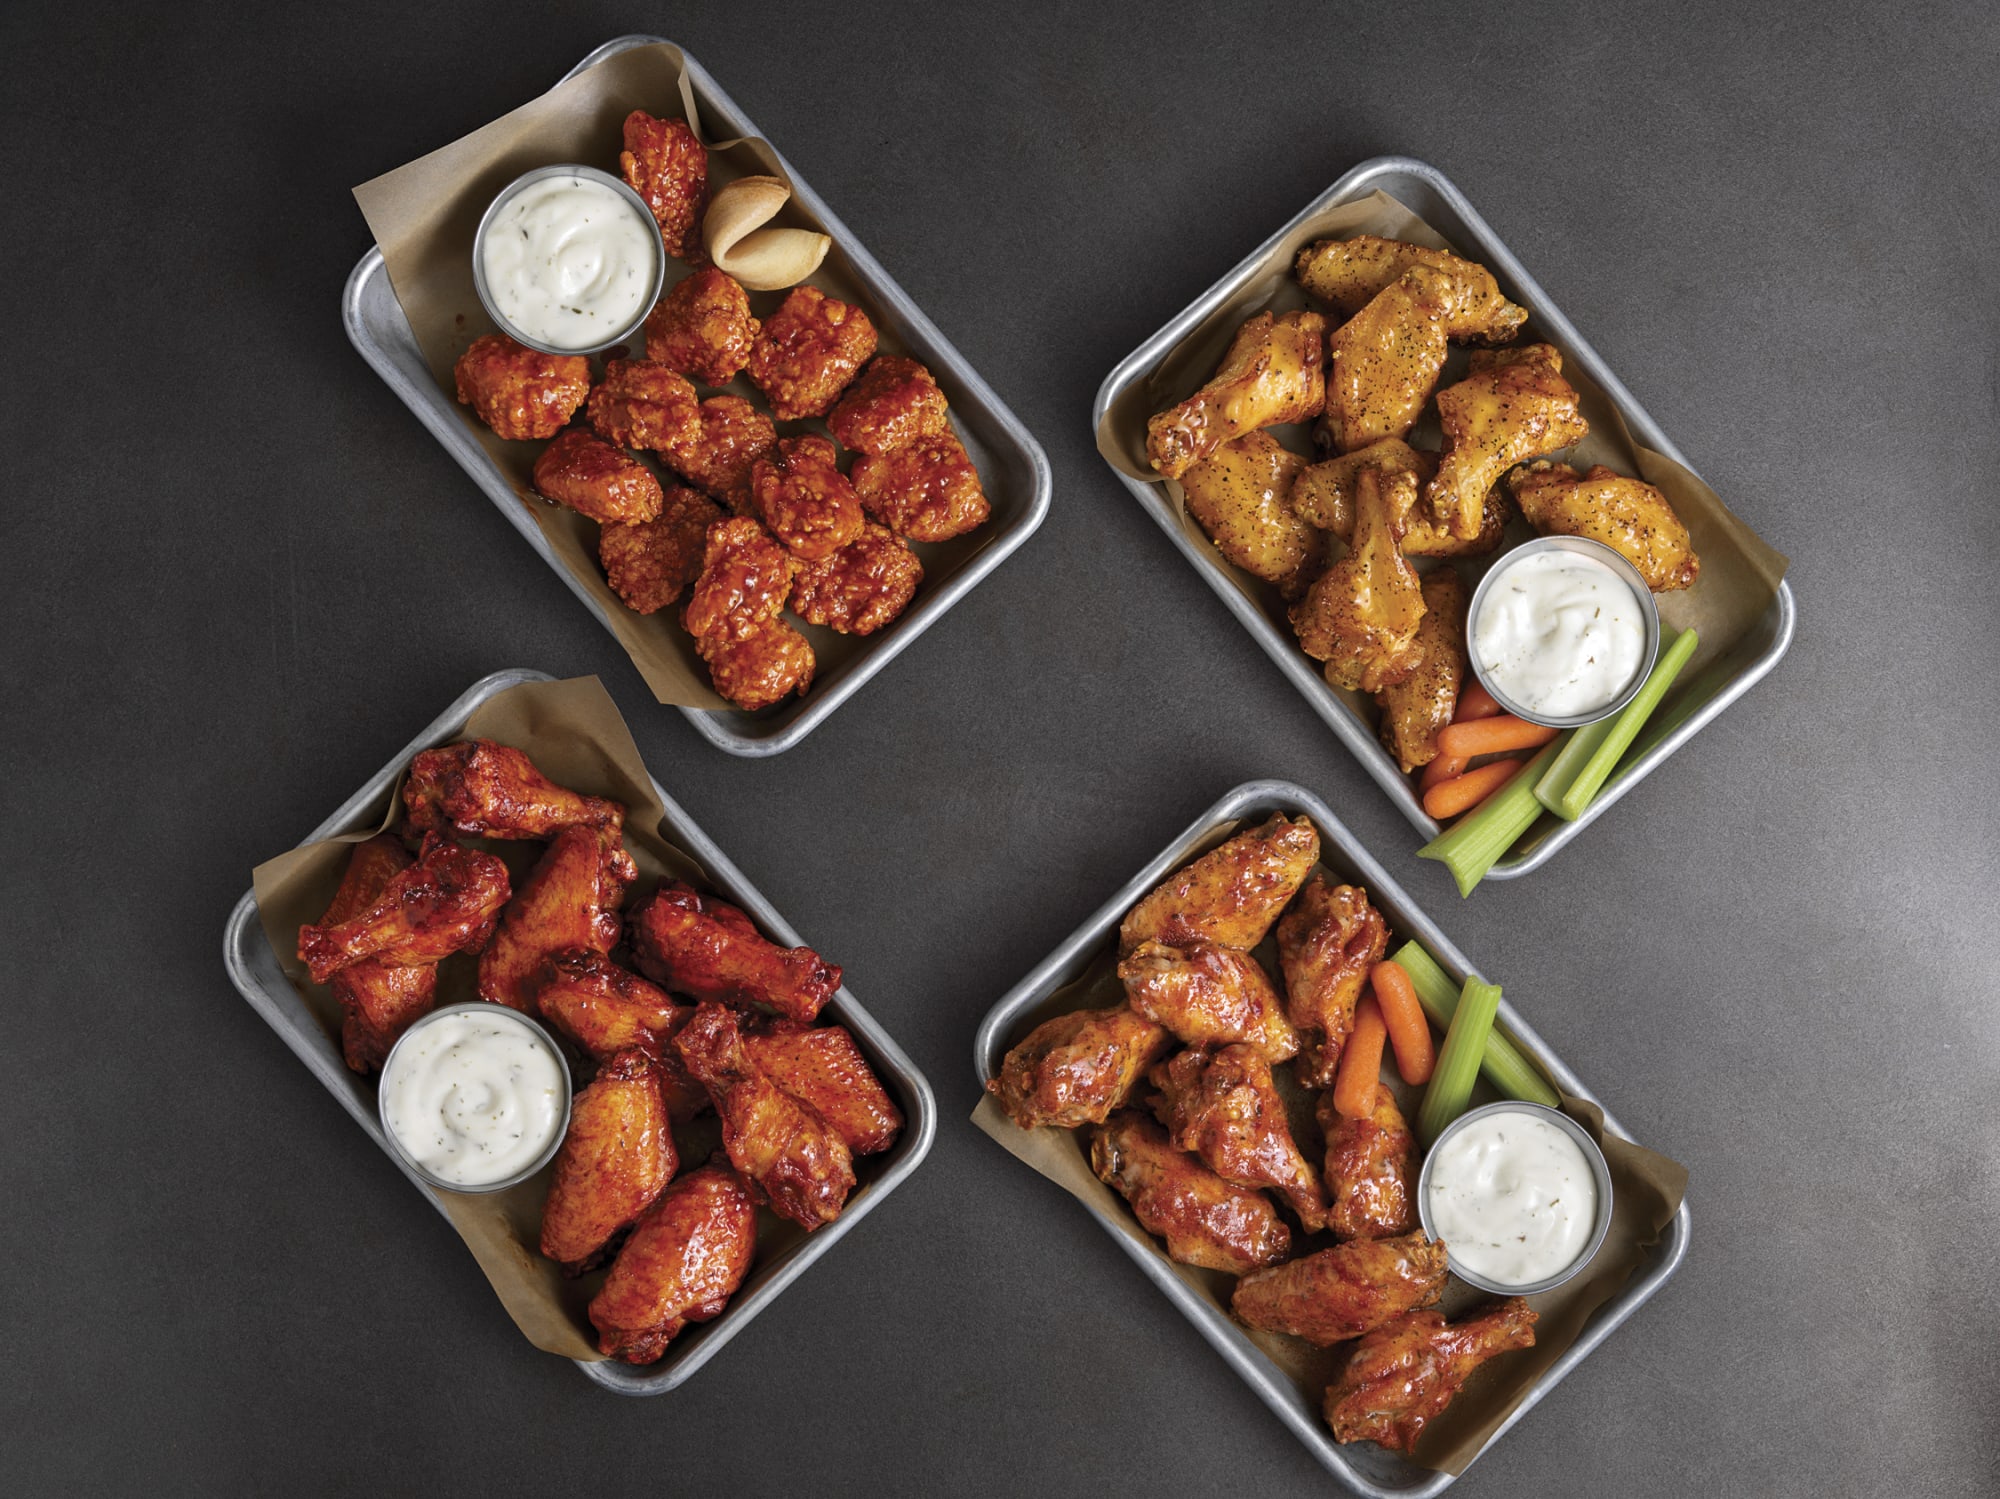 Buffalo Wild Wings new sauces bring big, bold flavors